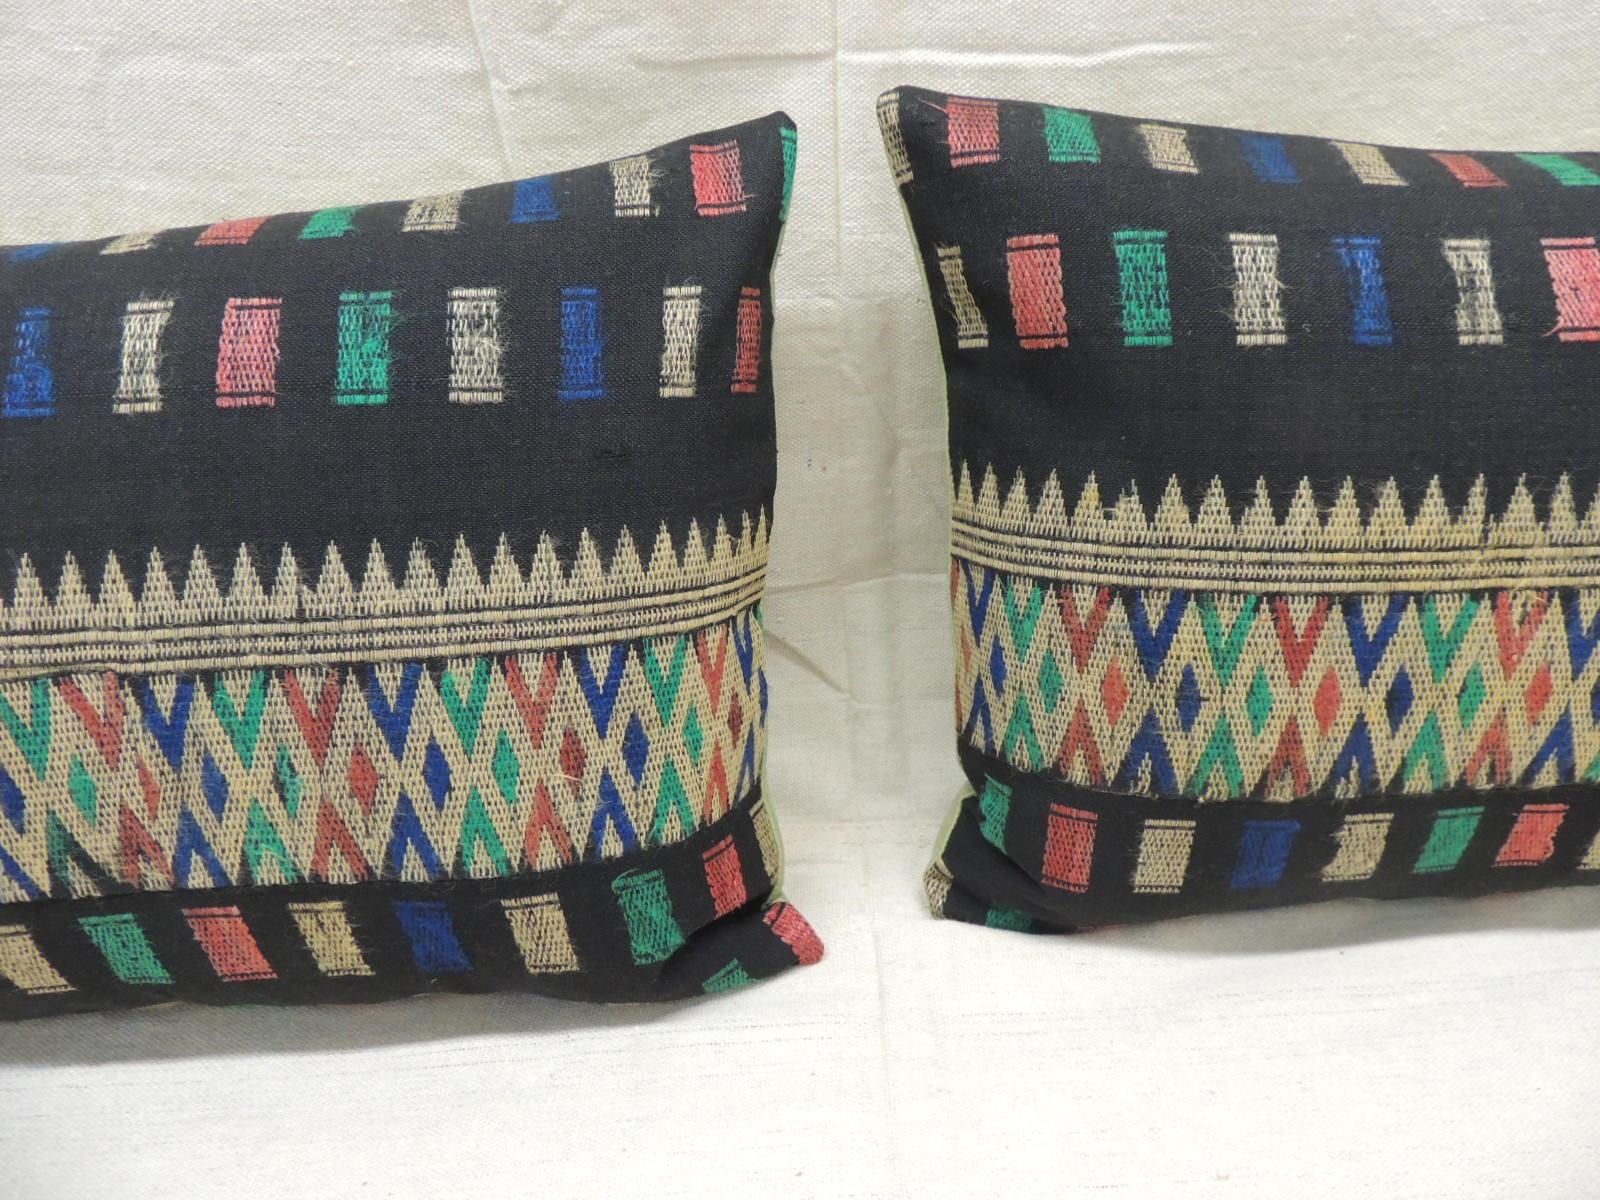 Pair of vintage woven colorful Laos woven silk decorative lumbar pillows
Decorative pillows finished with green silk backings.
In shades of green, black, yellow, orange, red, turquoise and blue.
Laotian textile throw pillows designed and